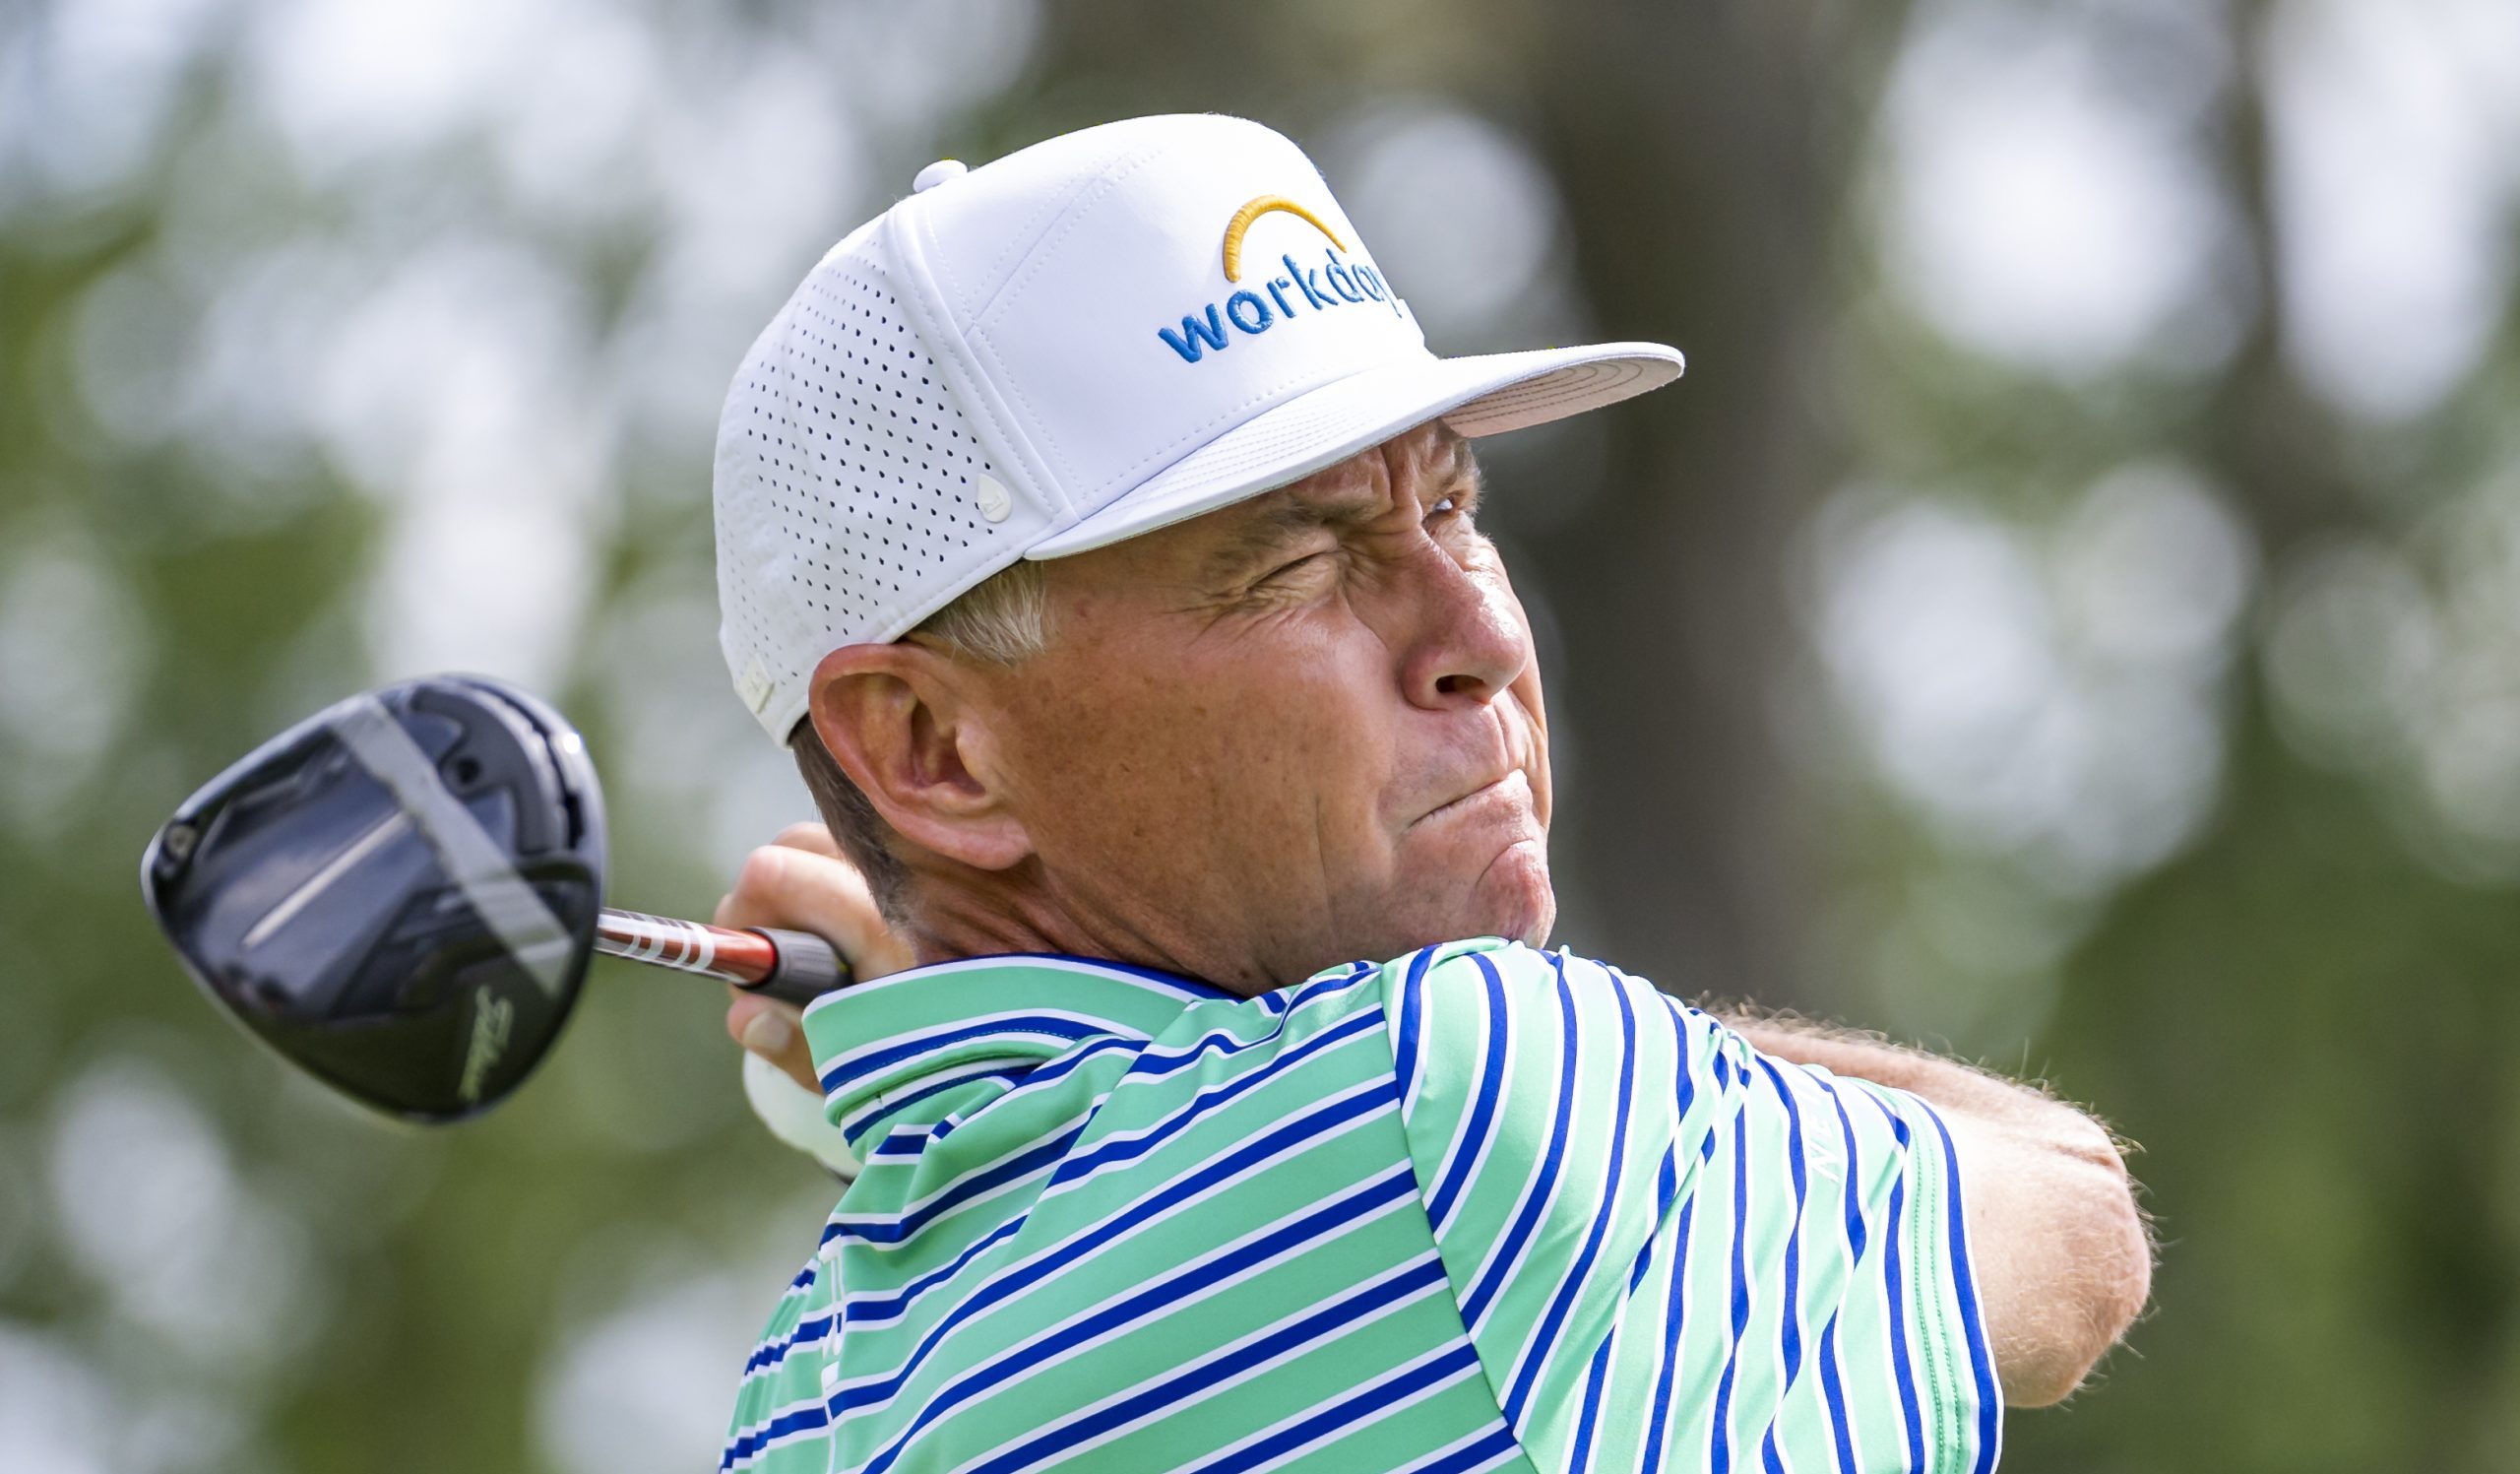 Davis Love III has a bold idea that he thinks would keep LIV golfers from playing in the majors.